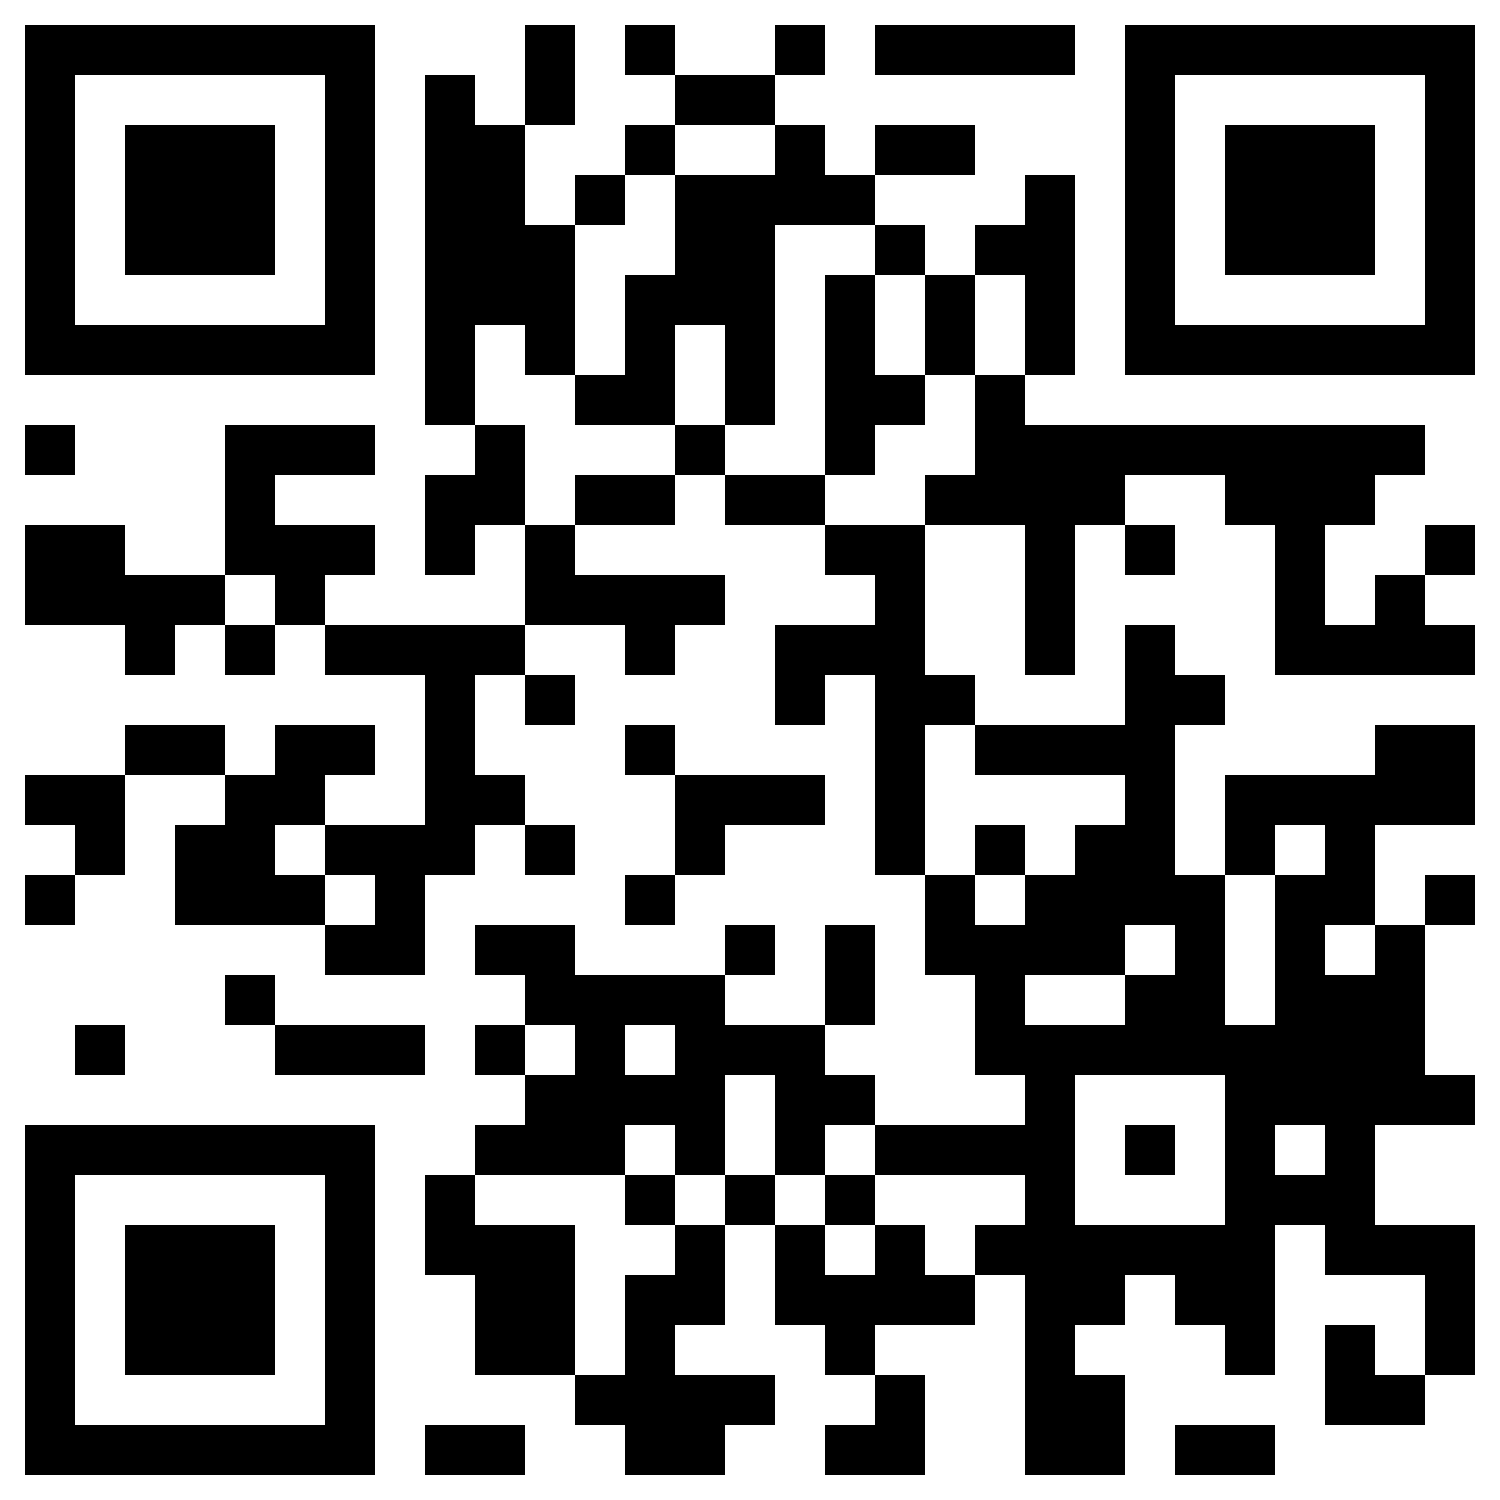 QR Code for Issue Family Book